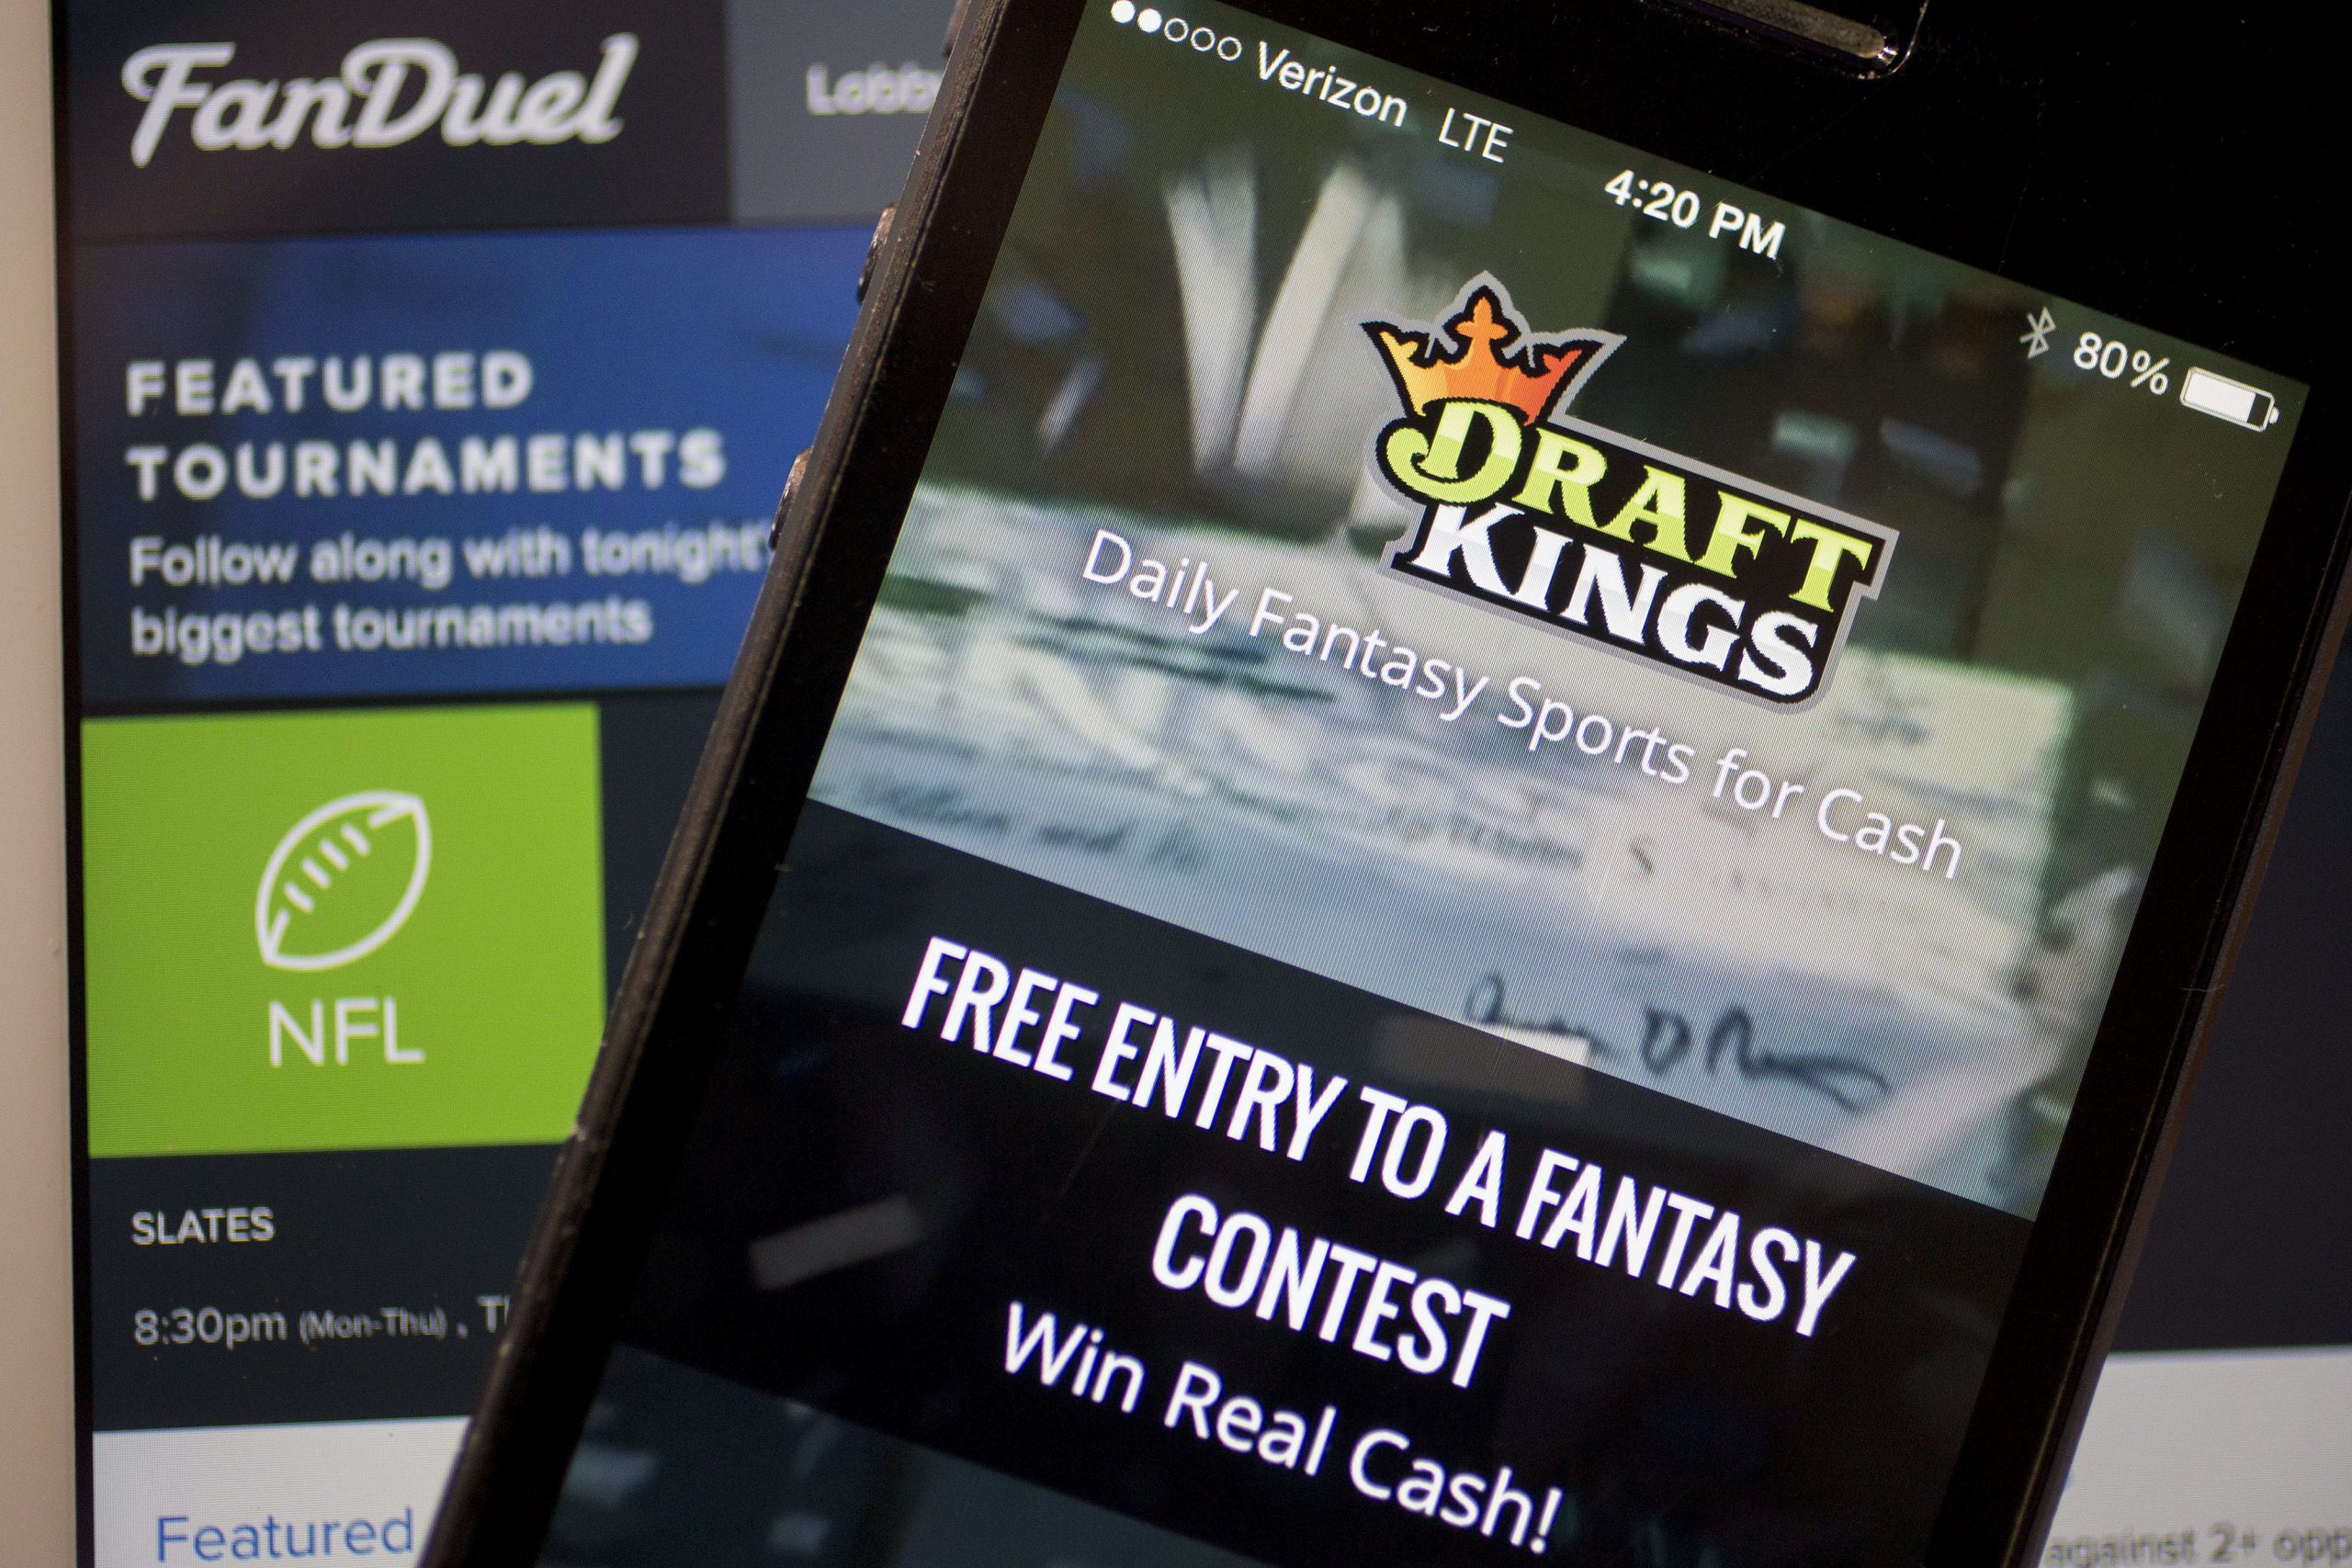 What Turner Sports activities, DraftKings, FanDuel get from partnership 